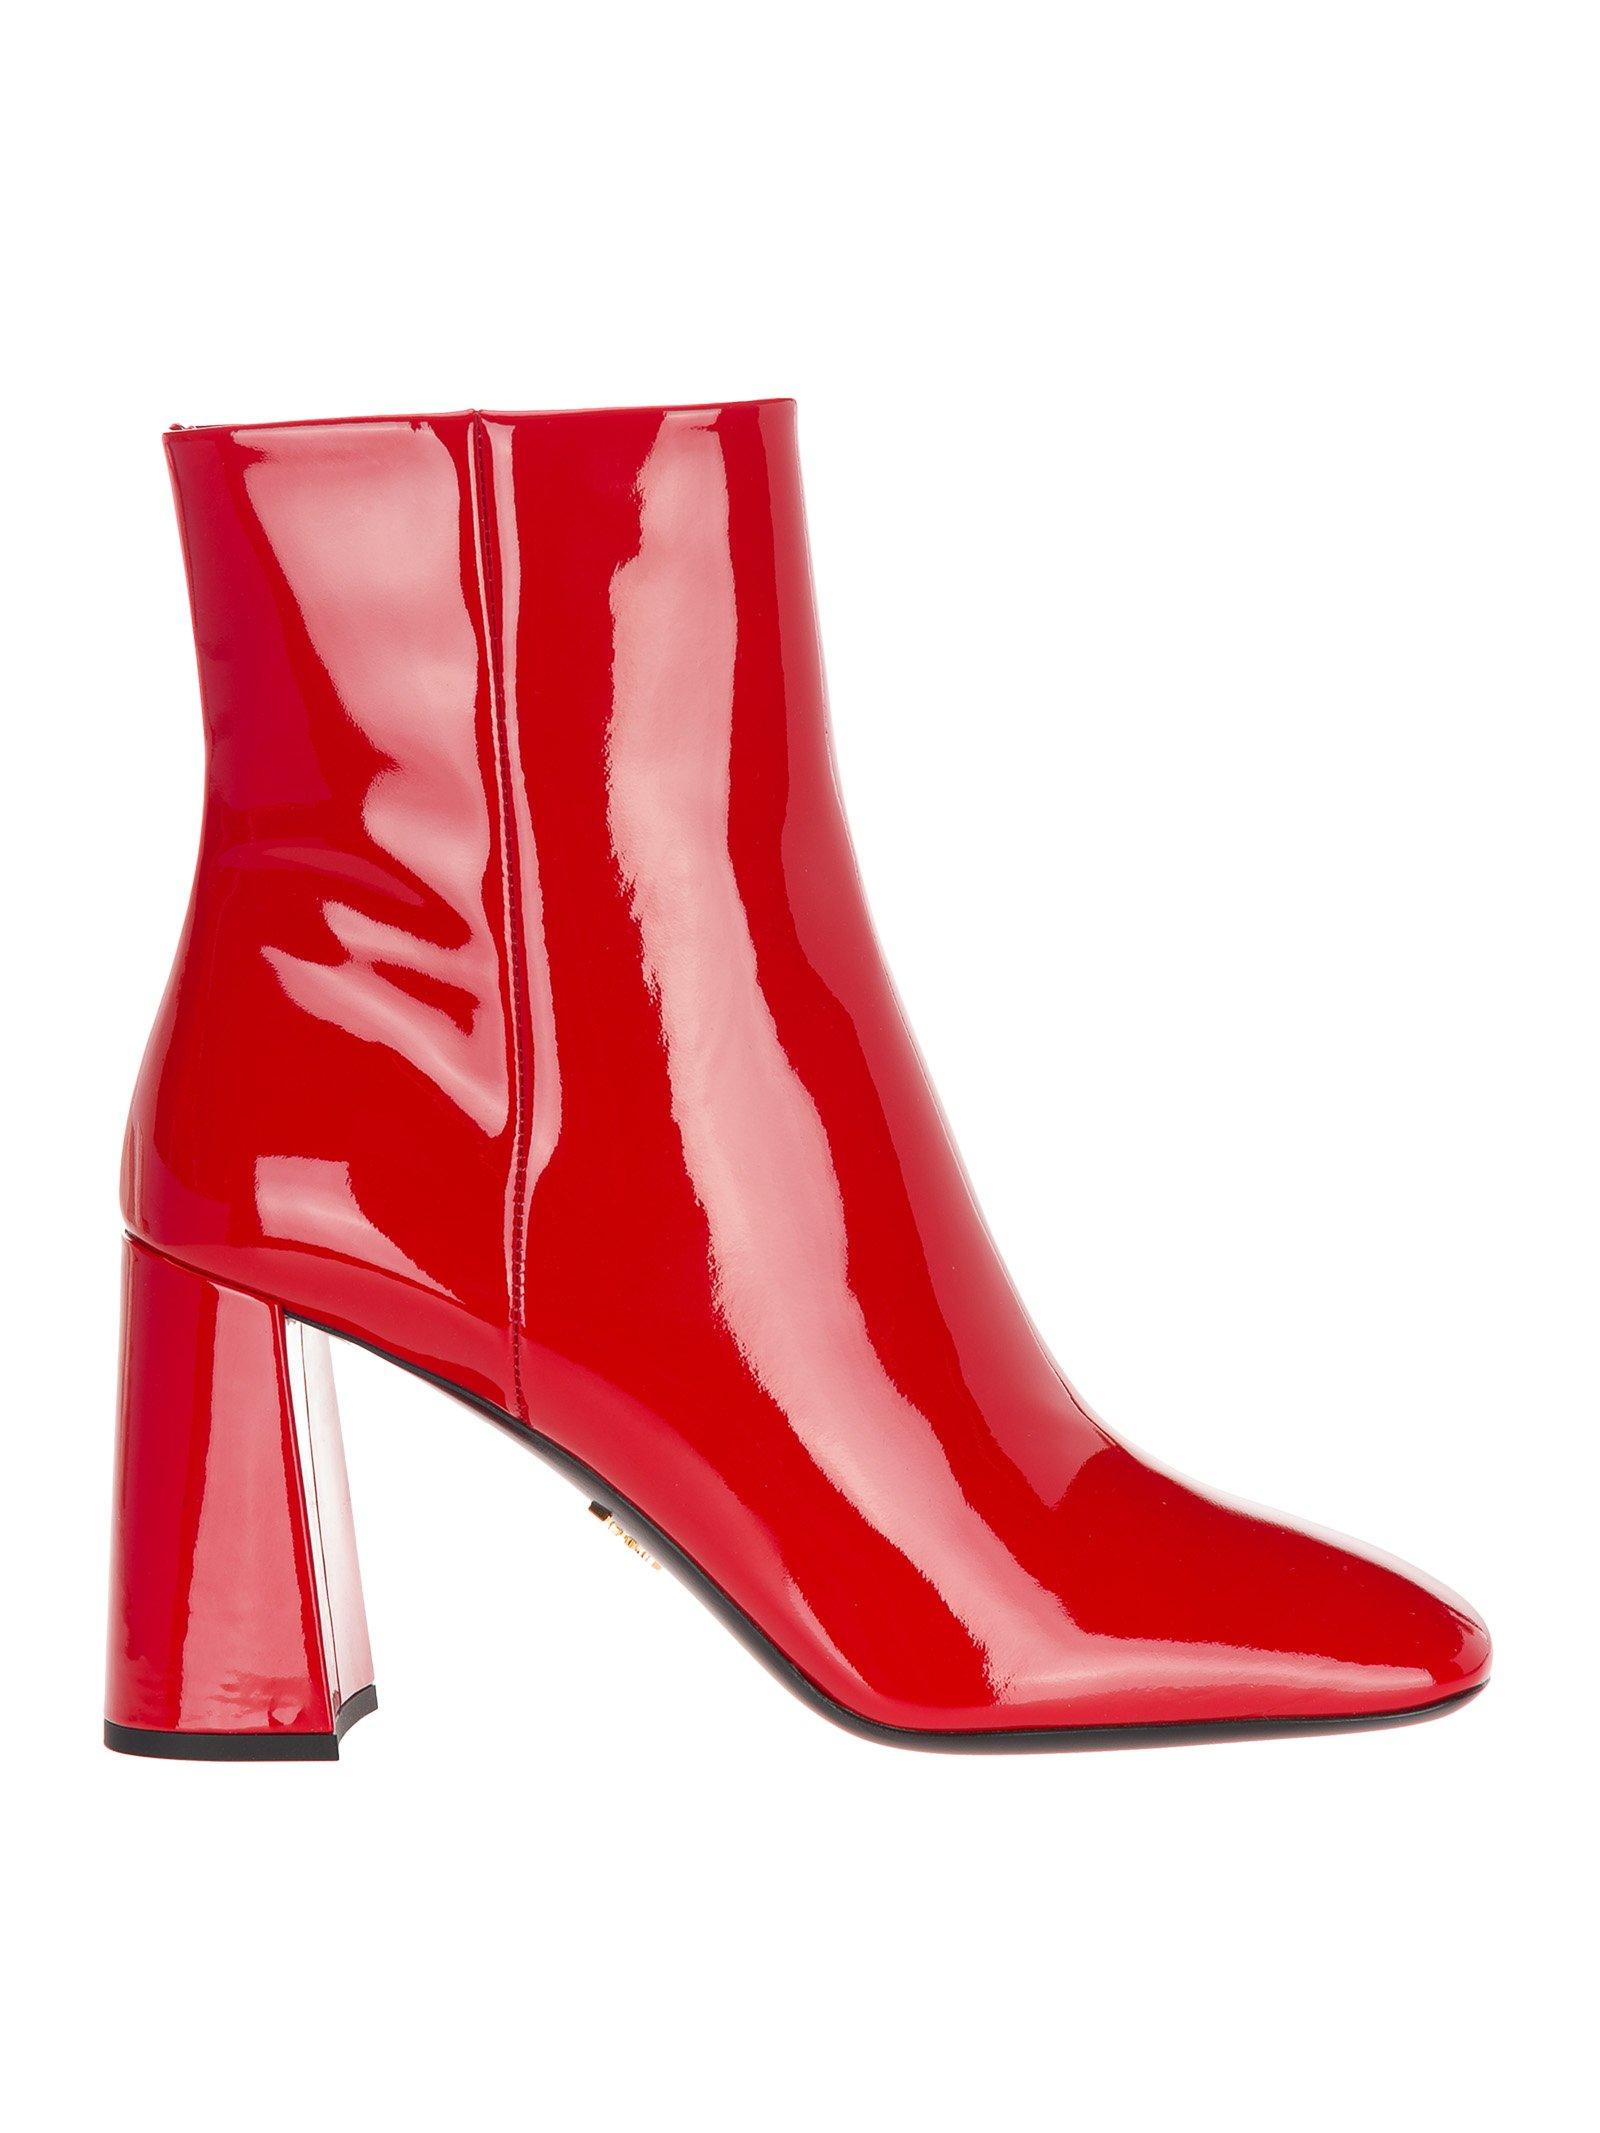 Prada Leather Patent Block Heel Boots in Red - Lyst